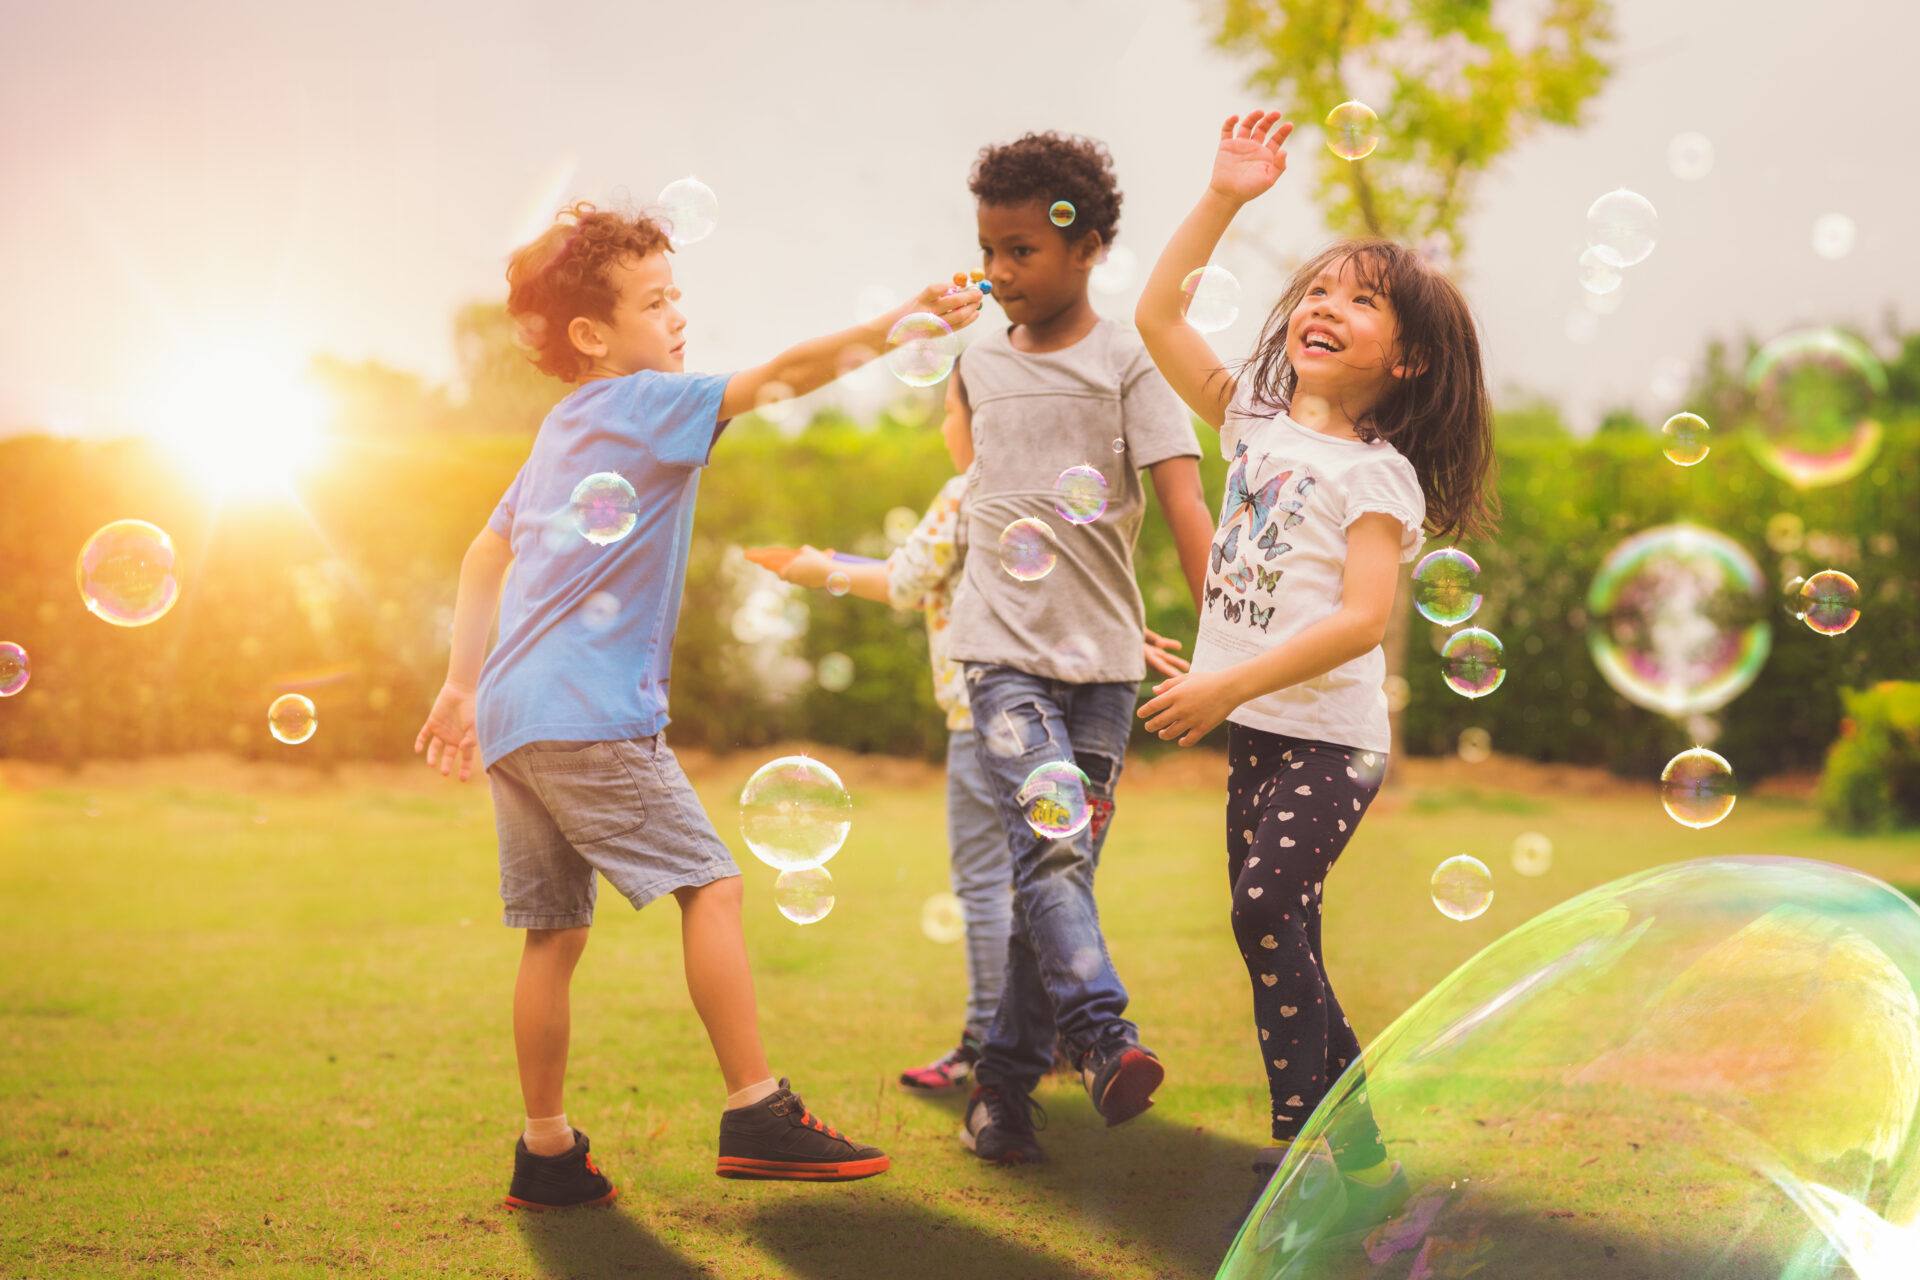 three children playing with soap bubbles in the grass